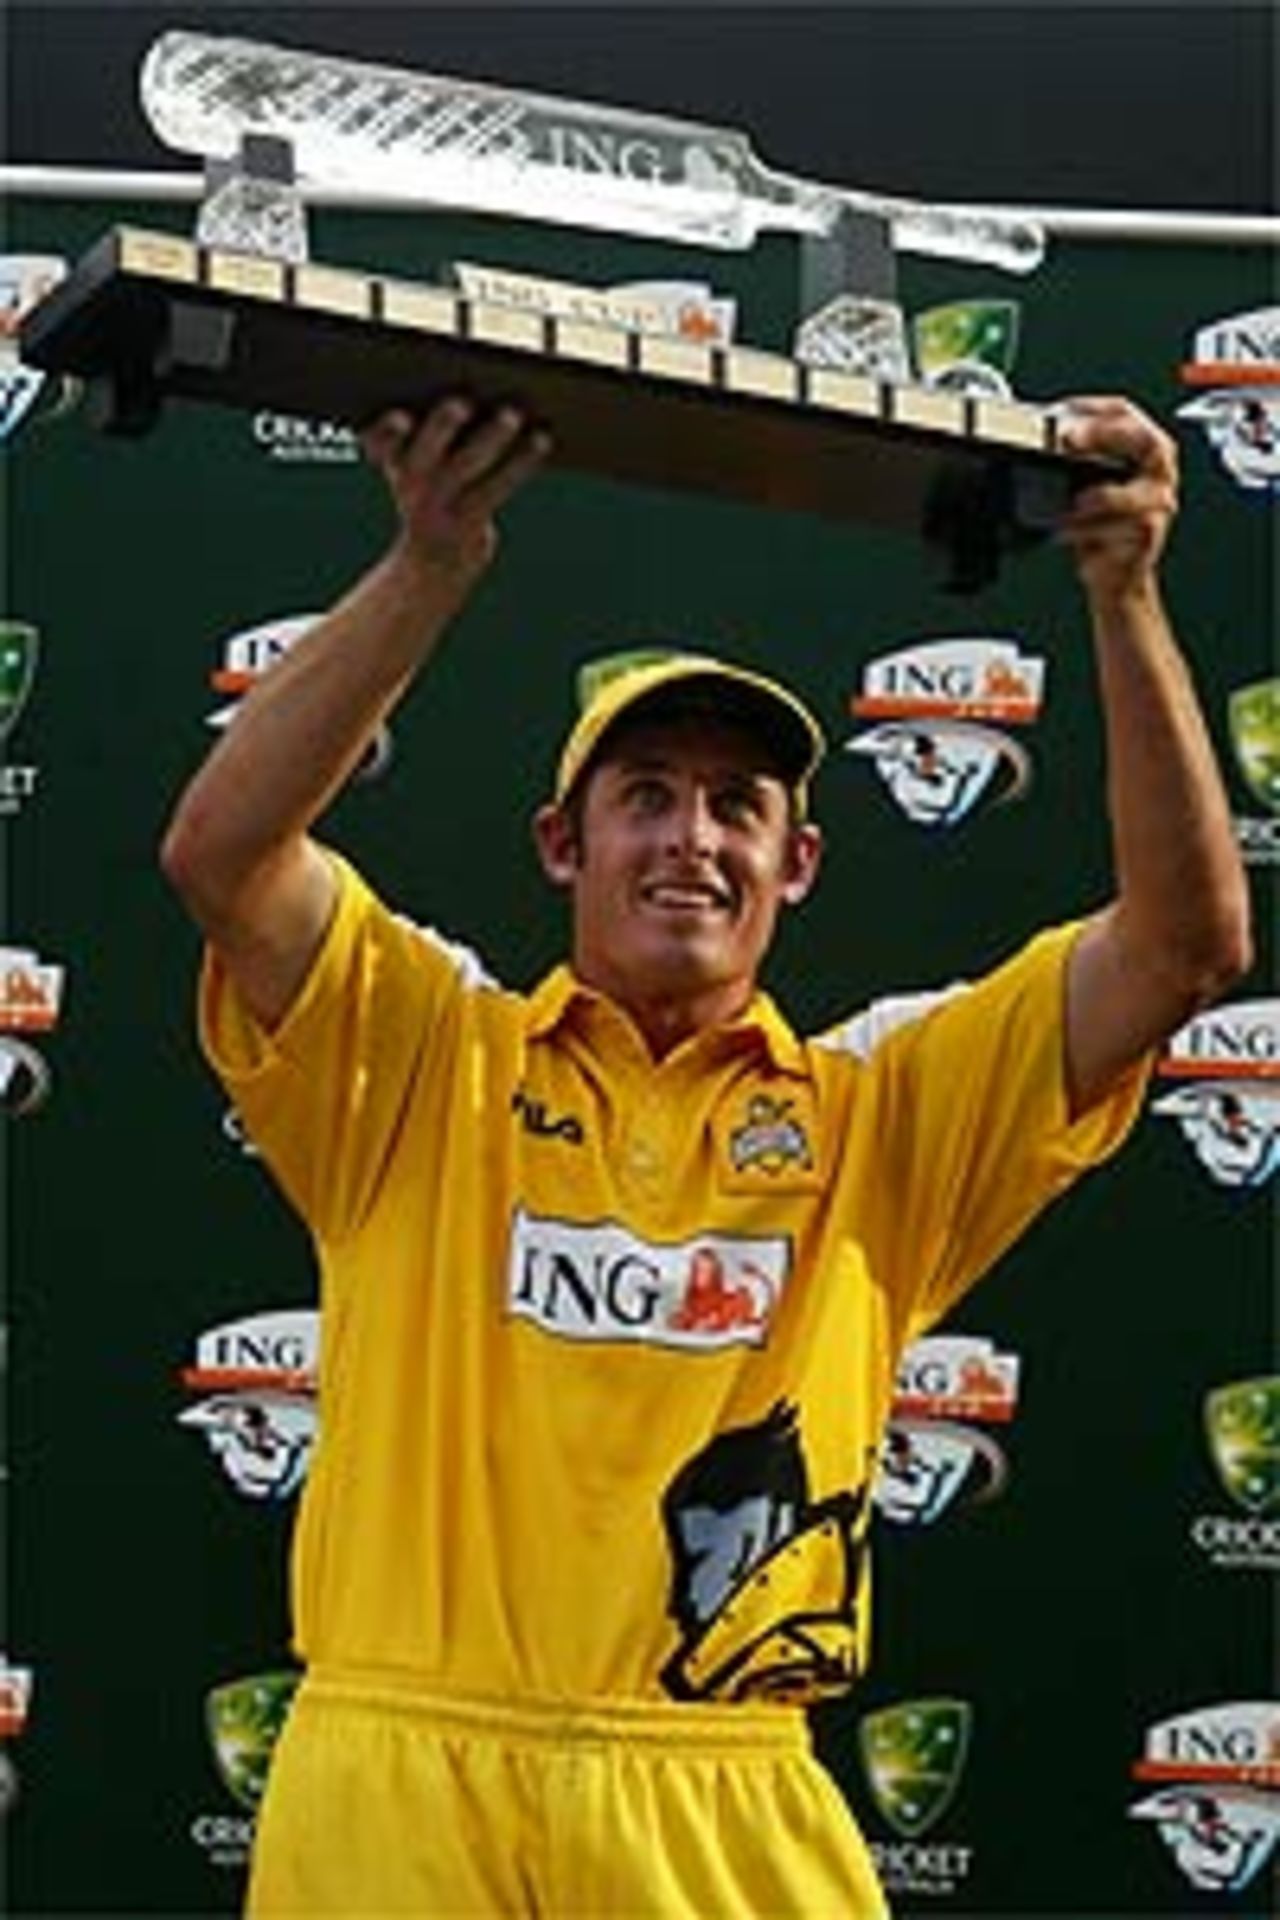 Mike Hussey of the Western Warriors holds the ING Cup aloft after the ING Cup final between the Queensland Bulls and Western Warriors played at the Gabba February 29, 2004 in Brisbane, Australia